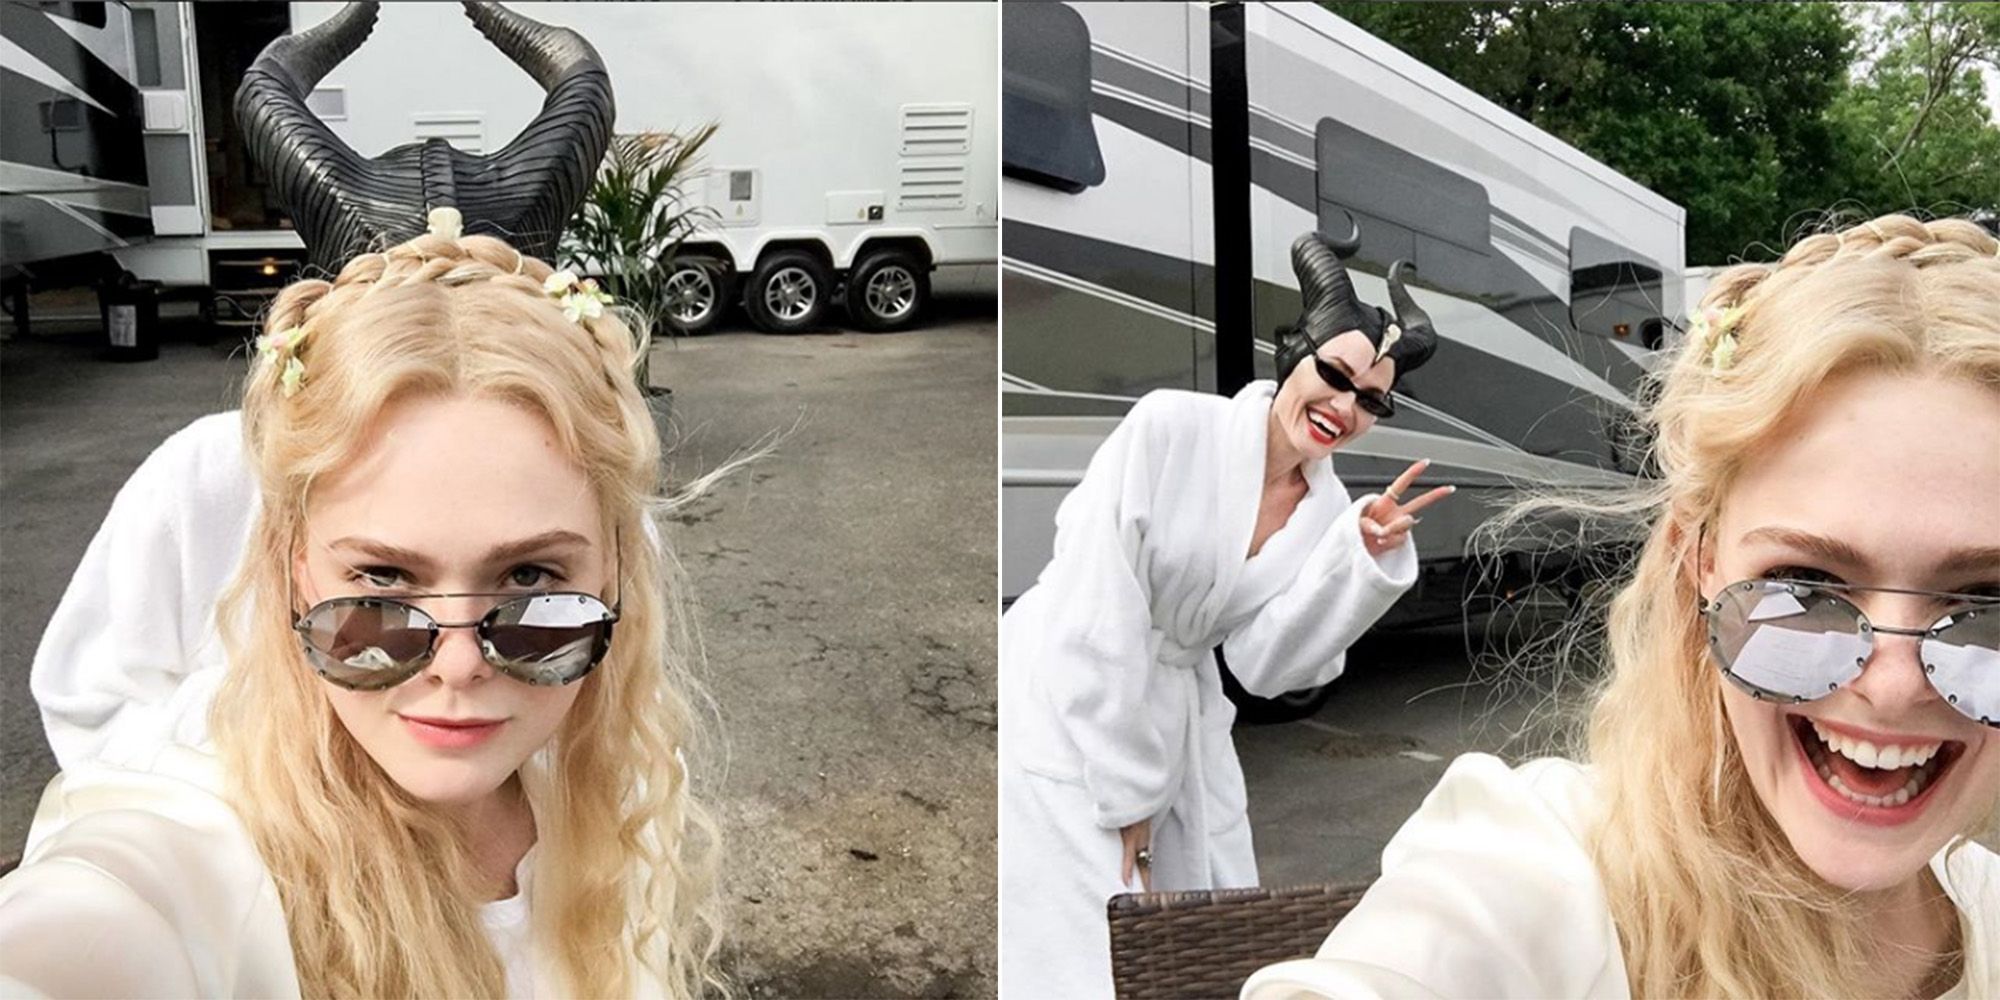 Jolie Elle Fanning Tease 'Maleficent 2' with Cute On-Set